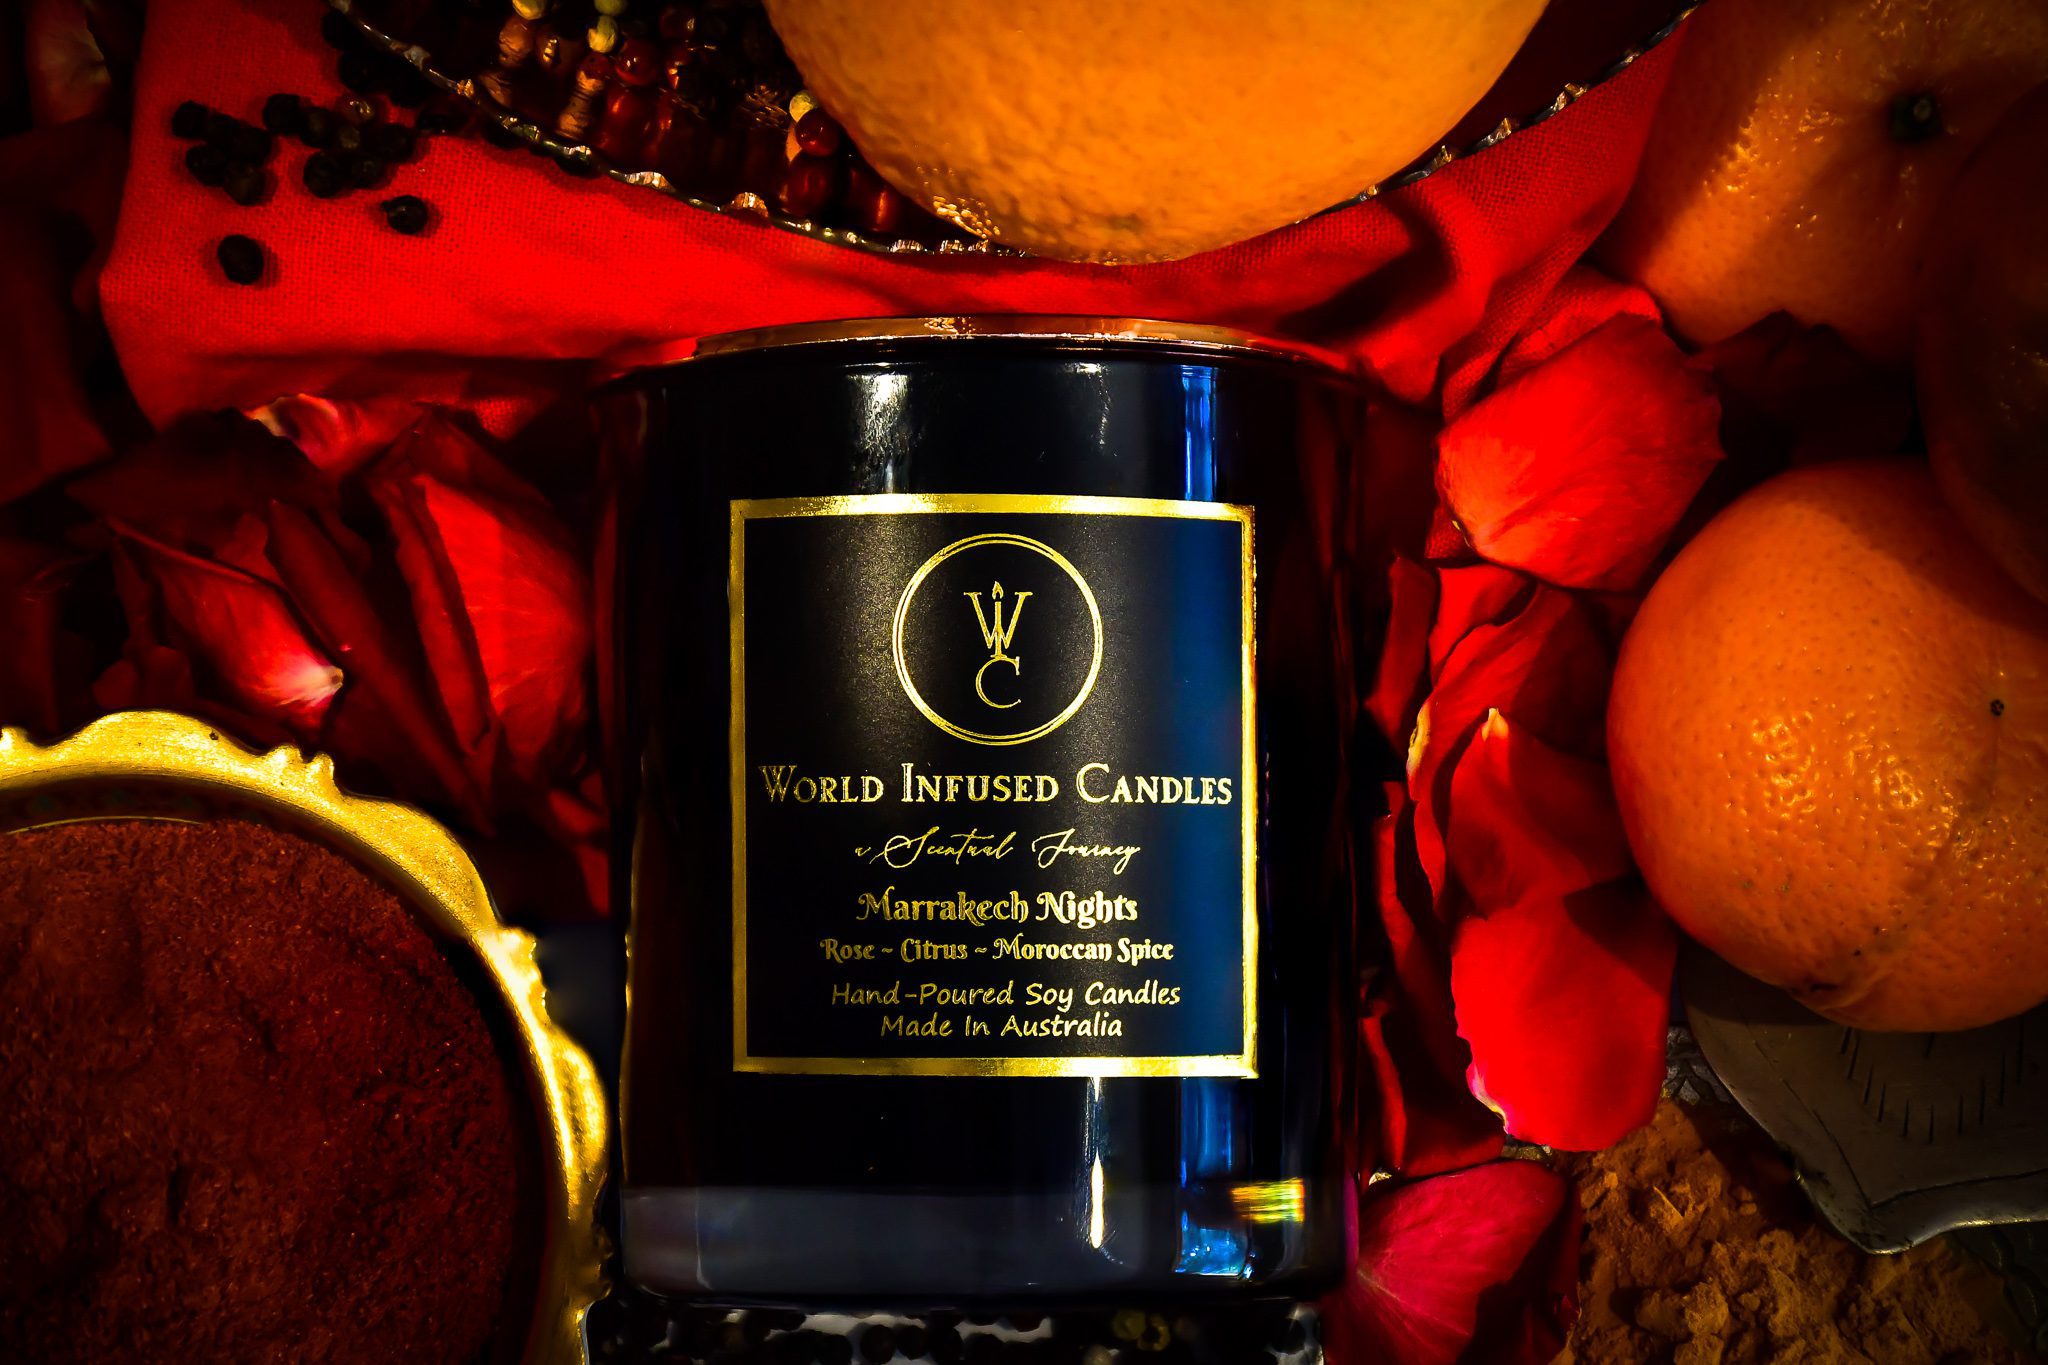 Marrakech Nights Soy Candle With the scents of Rose, Citrus and Morrocan Spice